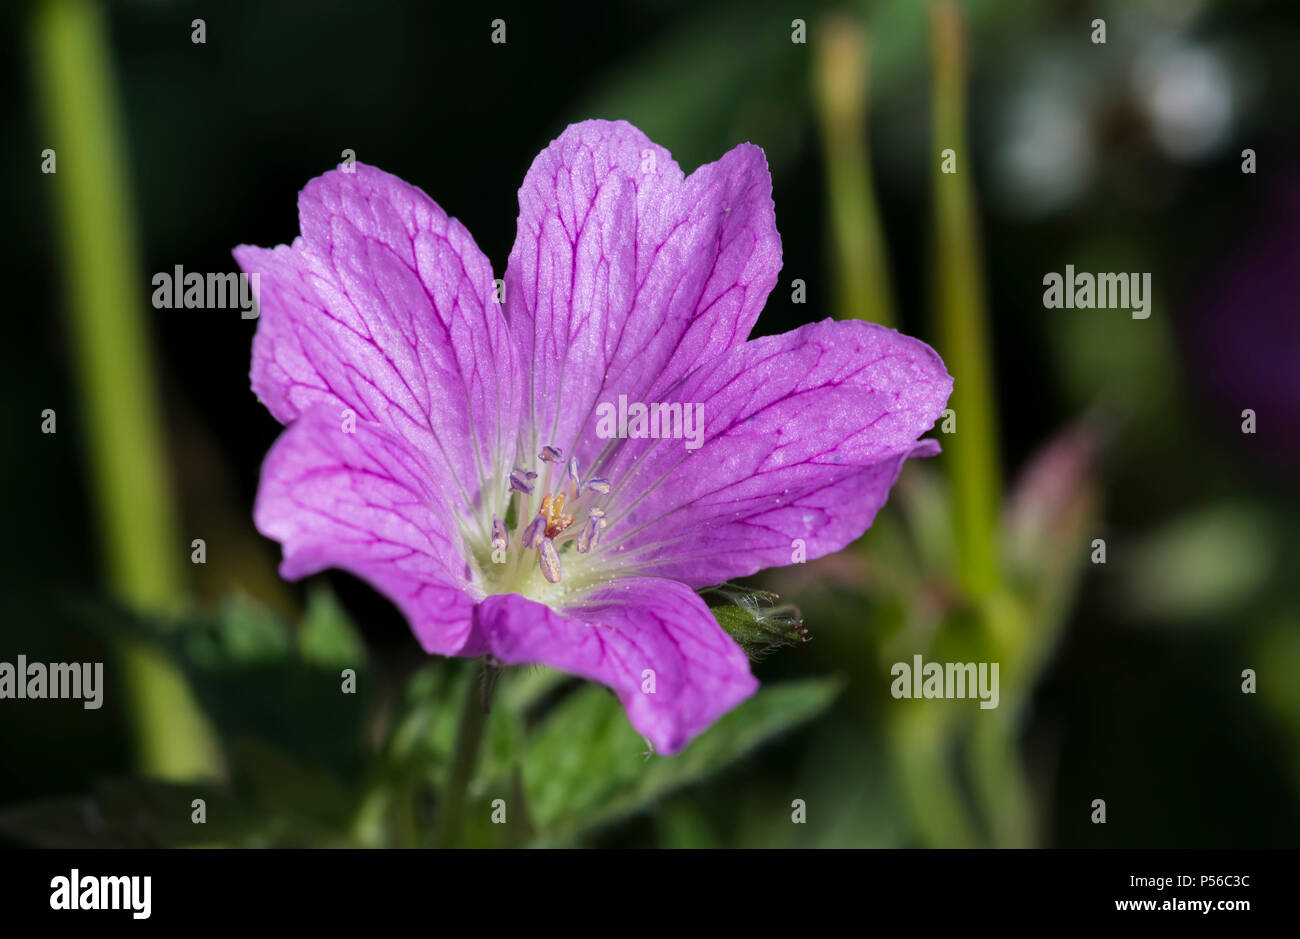 Single purple Druce's Crane's-Bill flower (Geranium × oxonianum) growing in a park in Summer in West Sussex, England, UK. Stock Photo